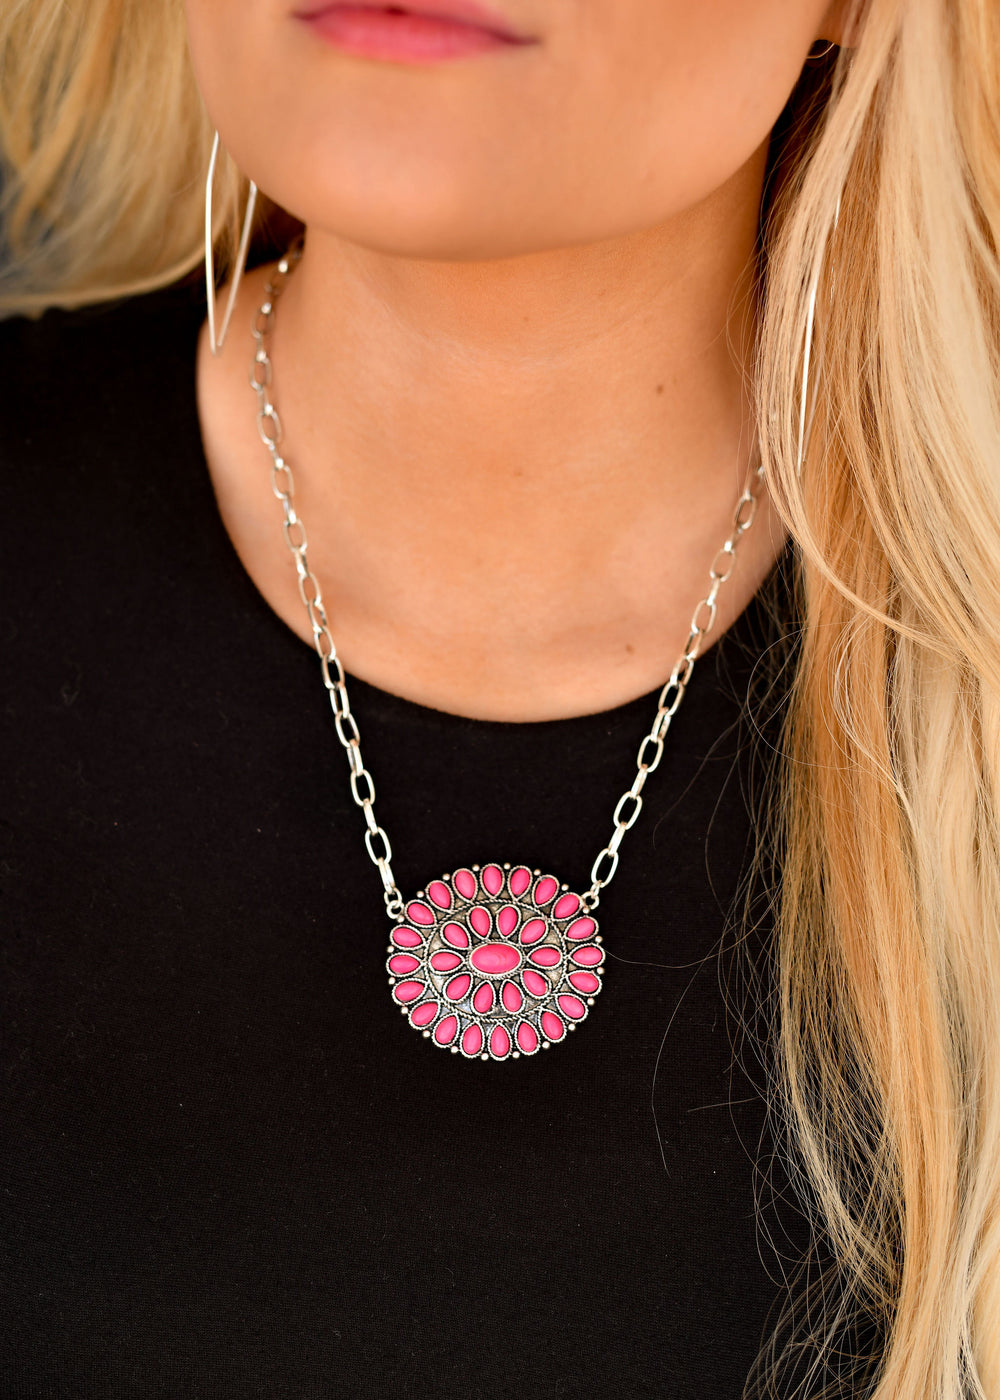 West & Co - Pink Cluster Pendant Necklace